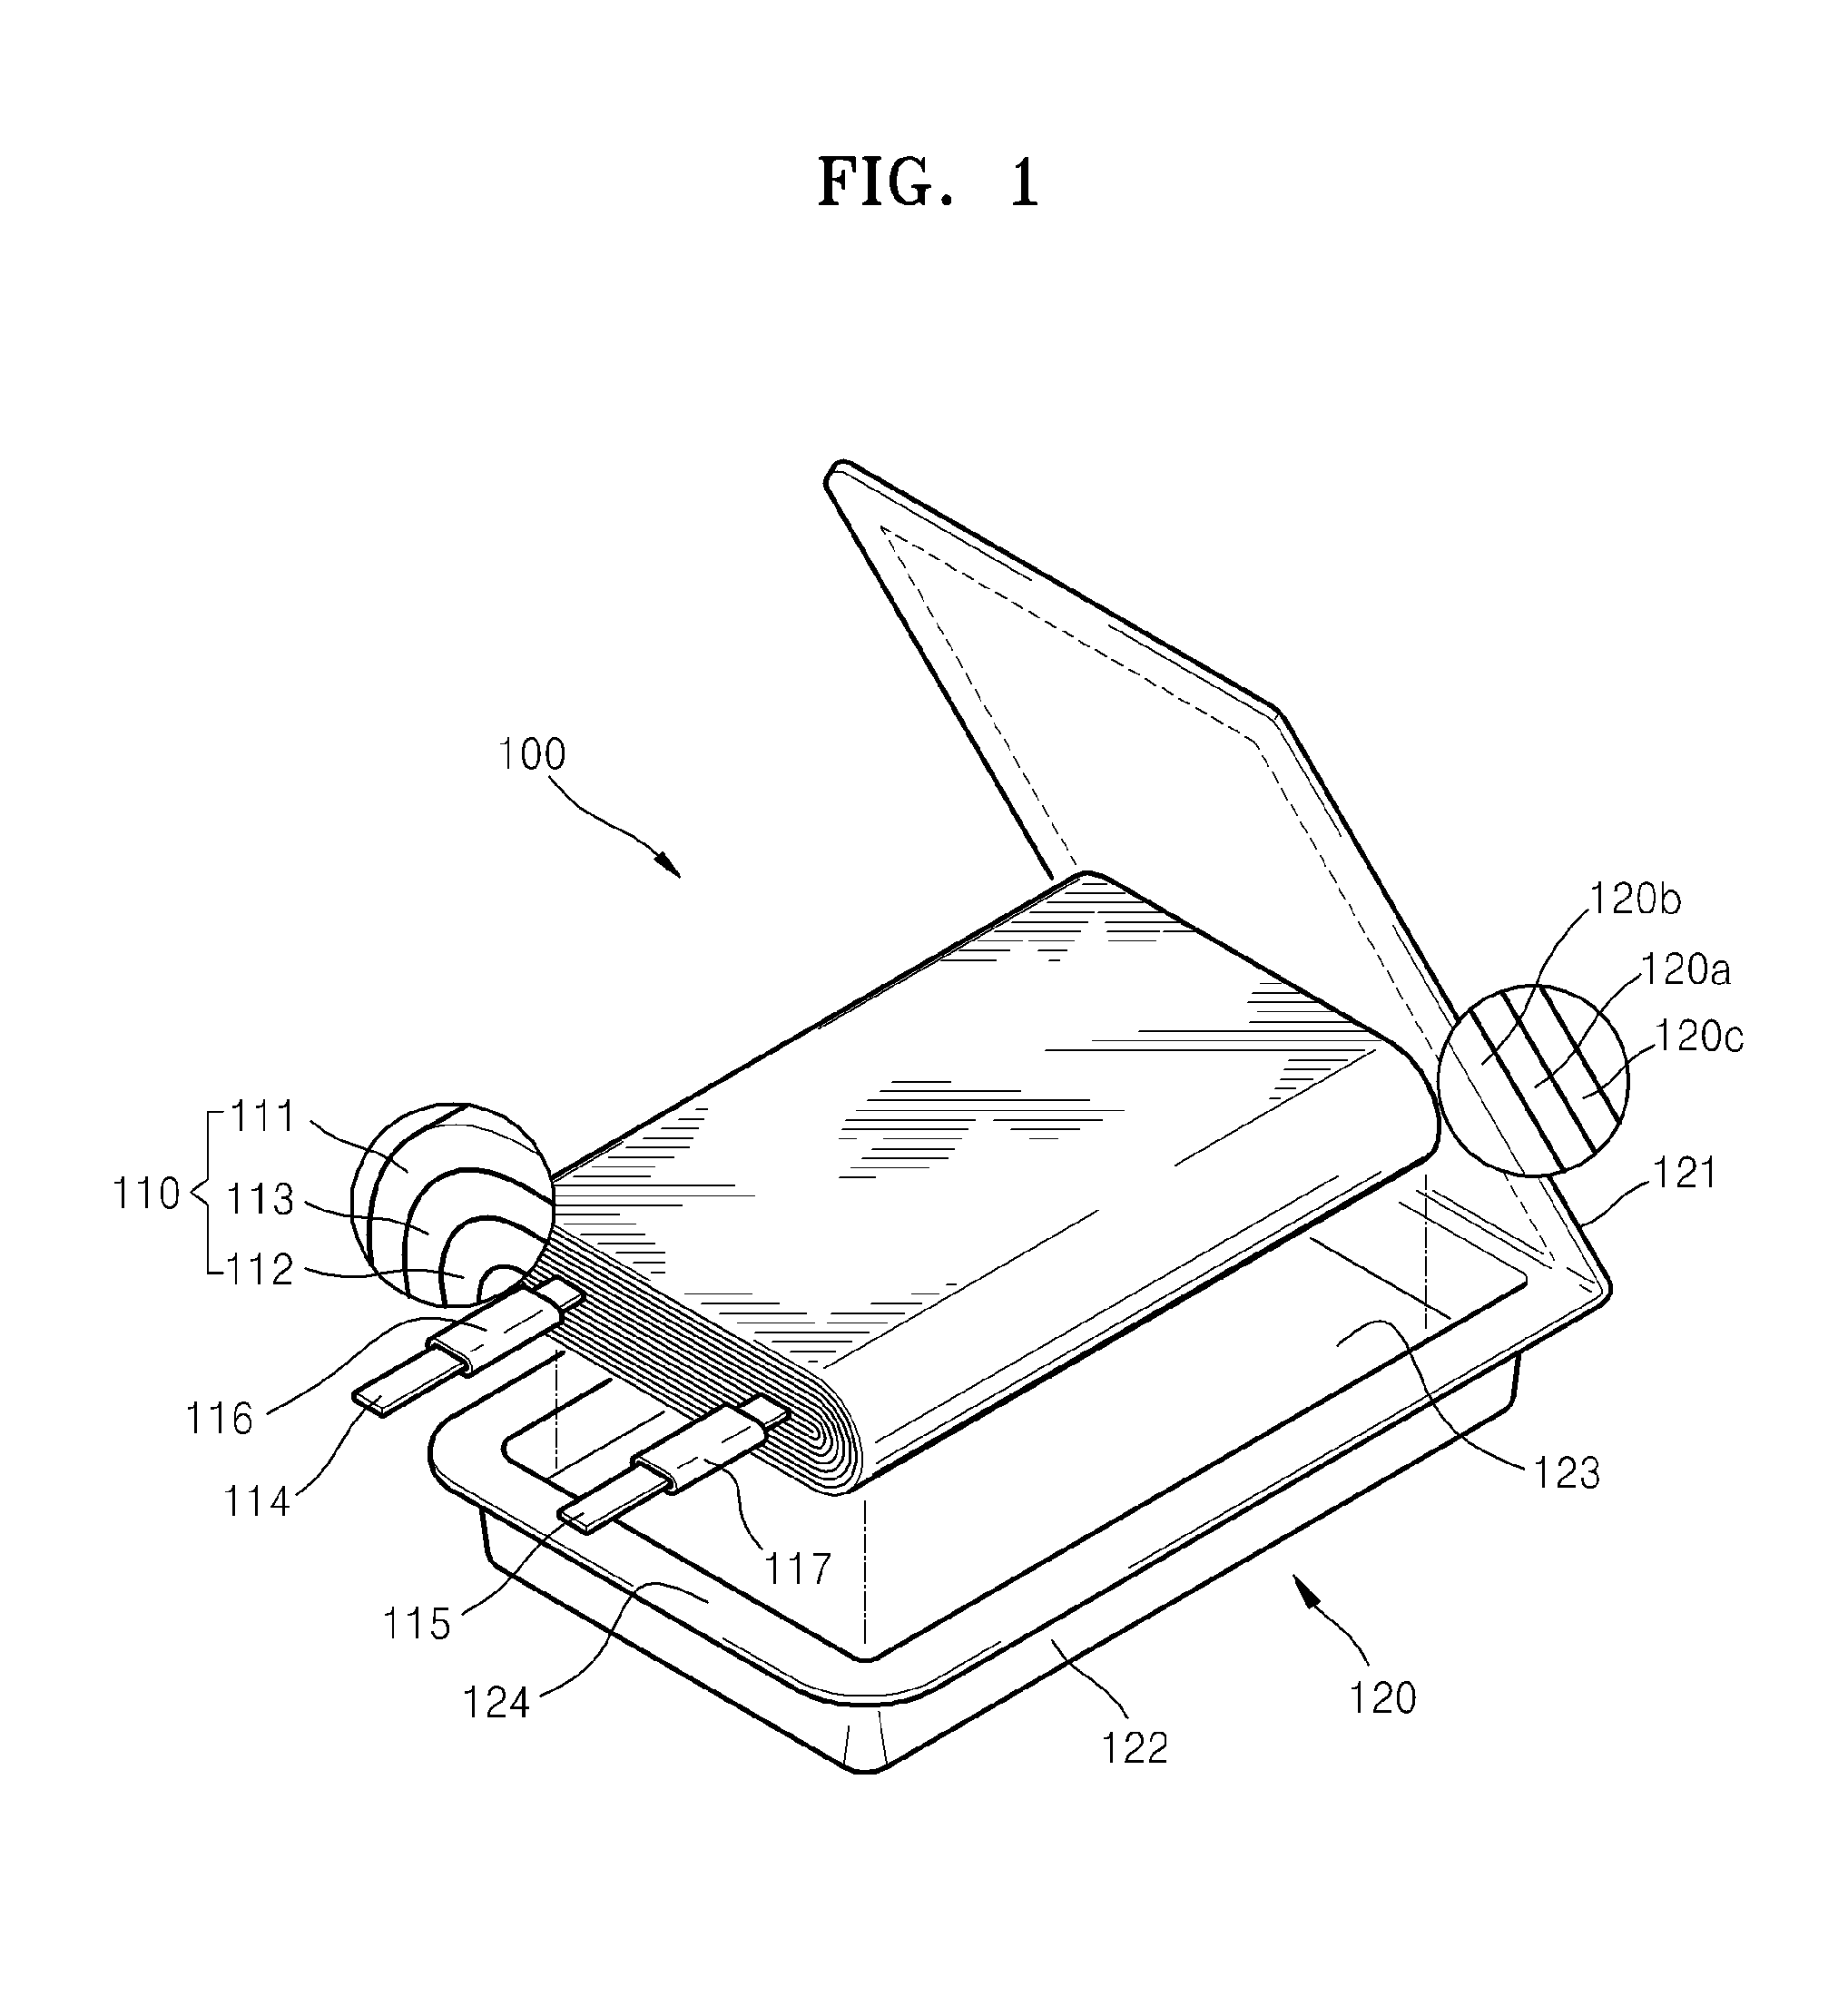 Battery Pack for a Lithium Polymer Battery